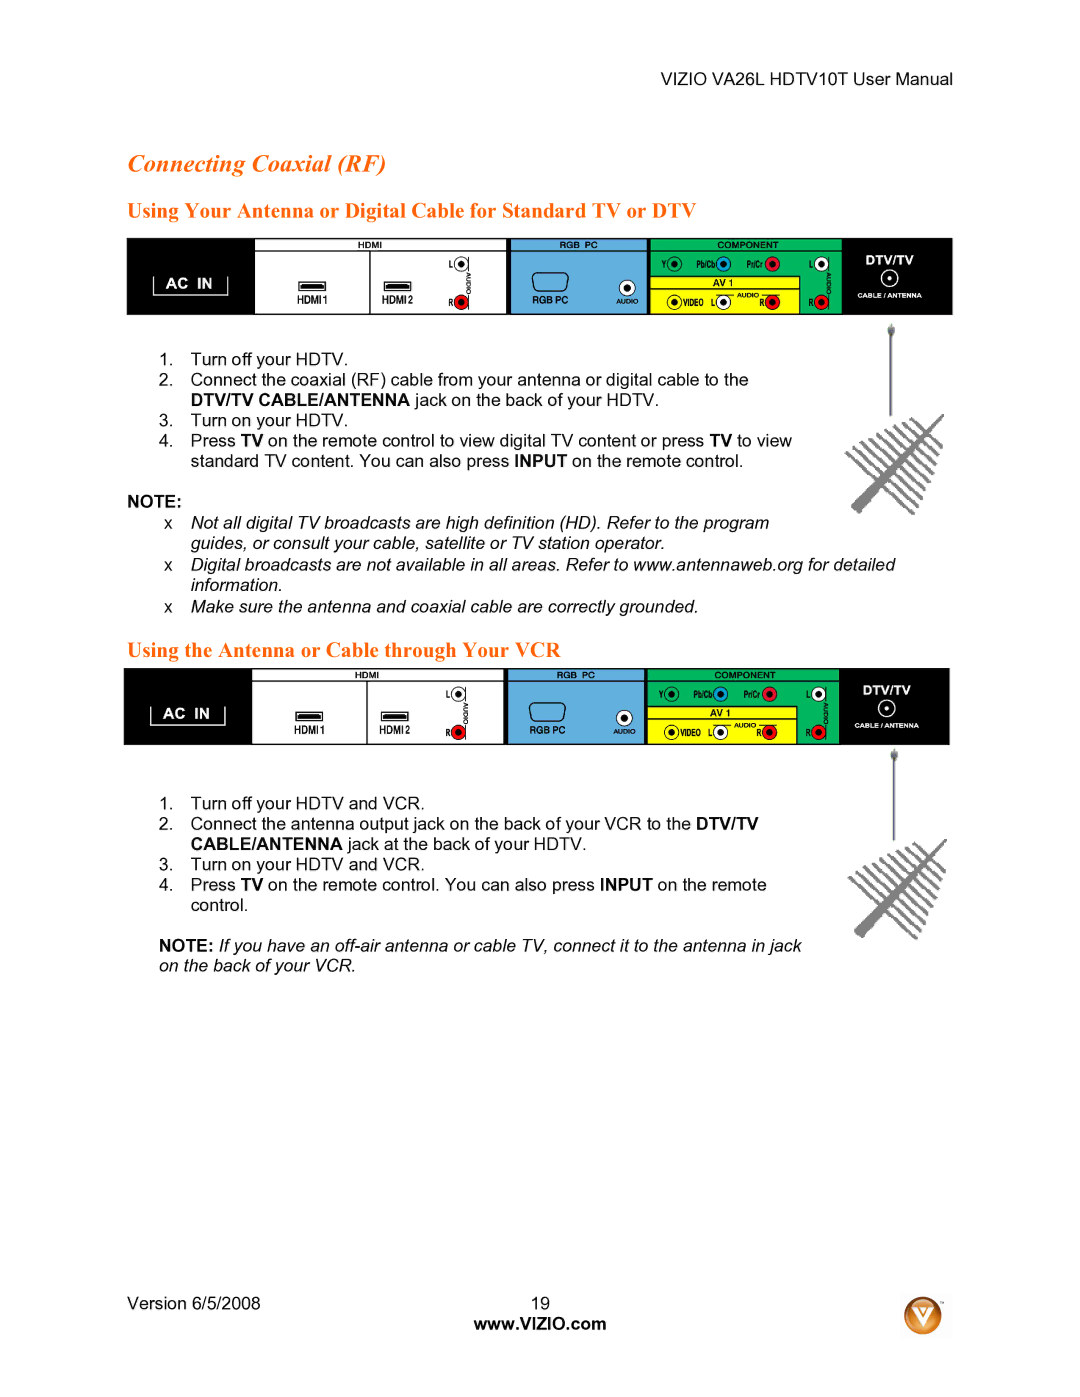 Vizio VA26L user manual Connecting Coaxial RF, Using Your Antenna or Digital Cable for Standard TV or DTV 